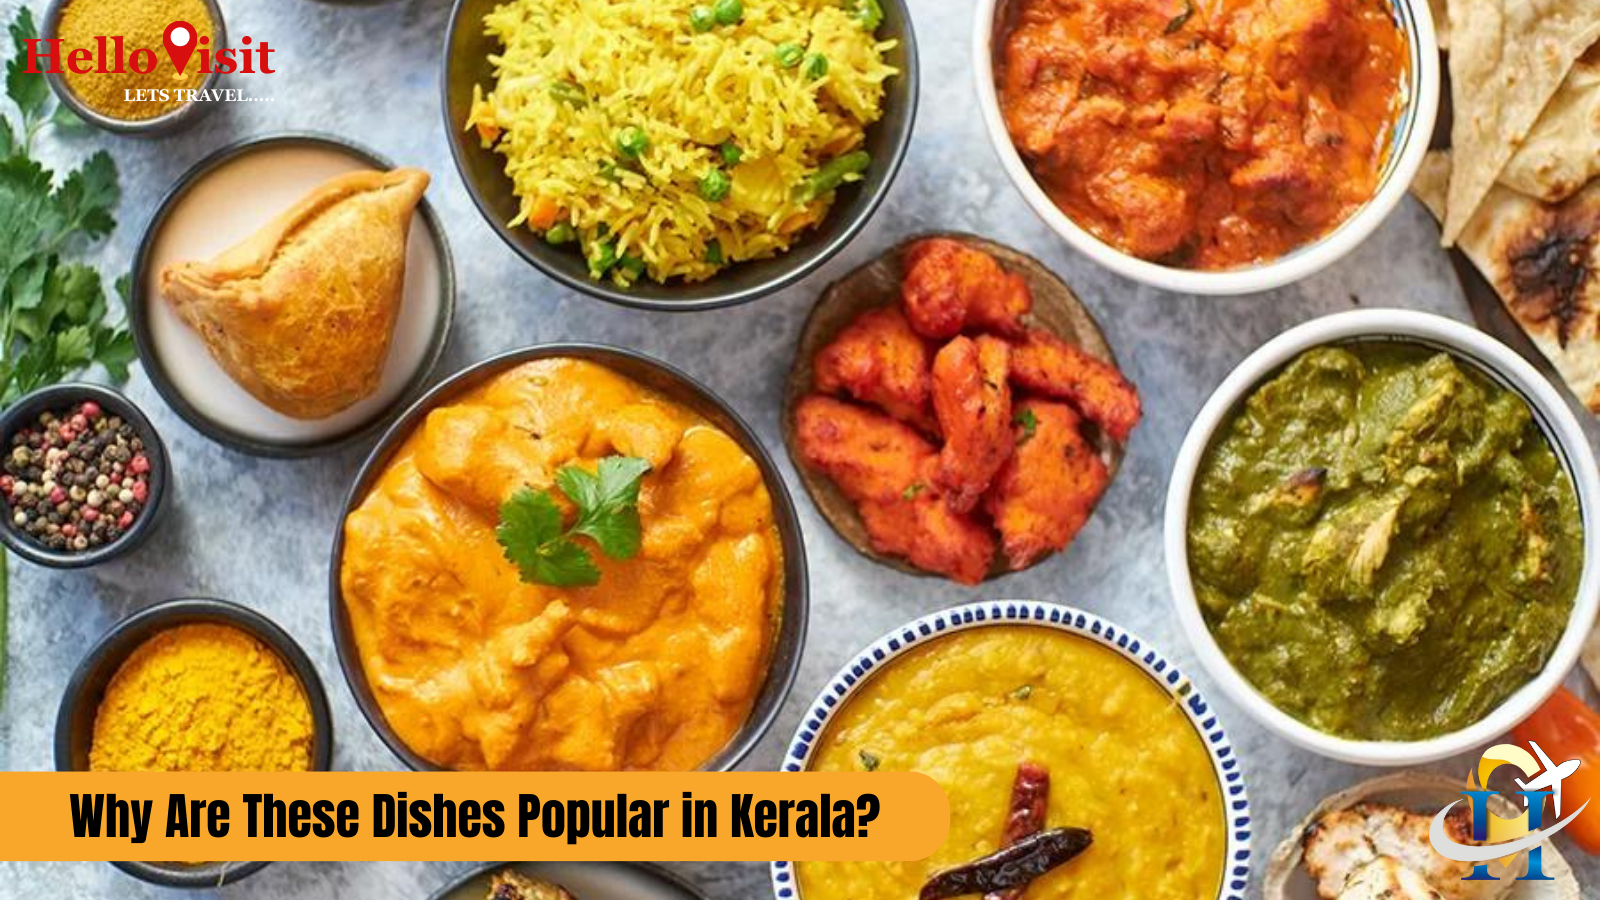 Why Are These Dishes Popular in Kerala?